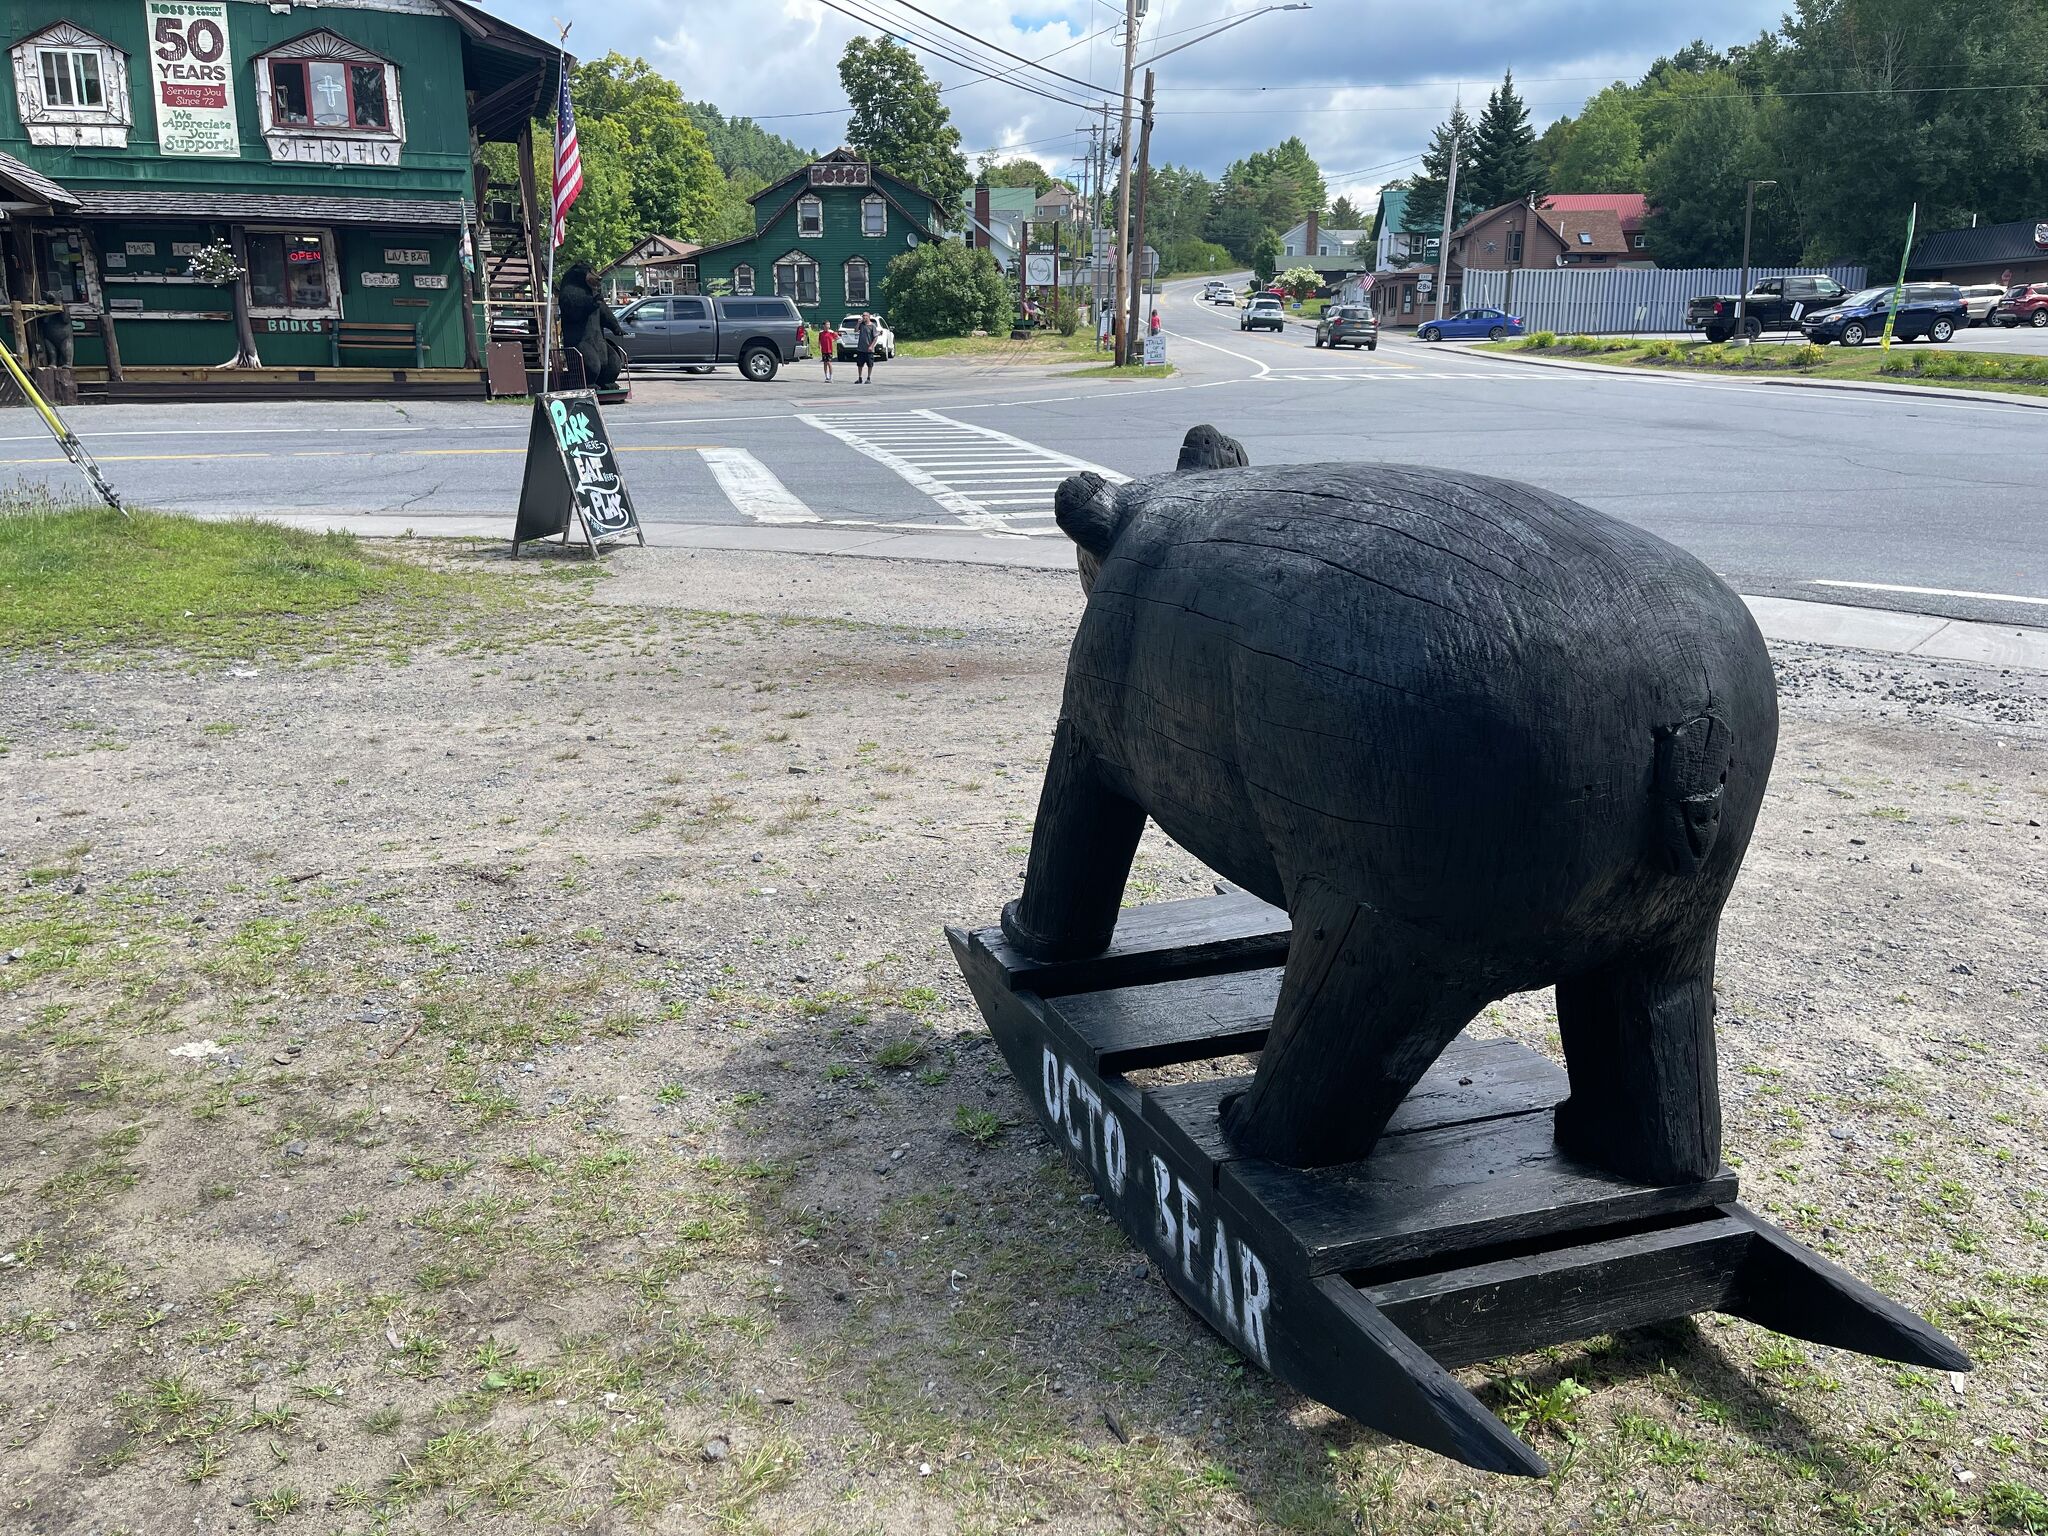 Is Long Lake euthanizing its bear-friendly image one creature at a time? - Times Union